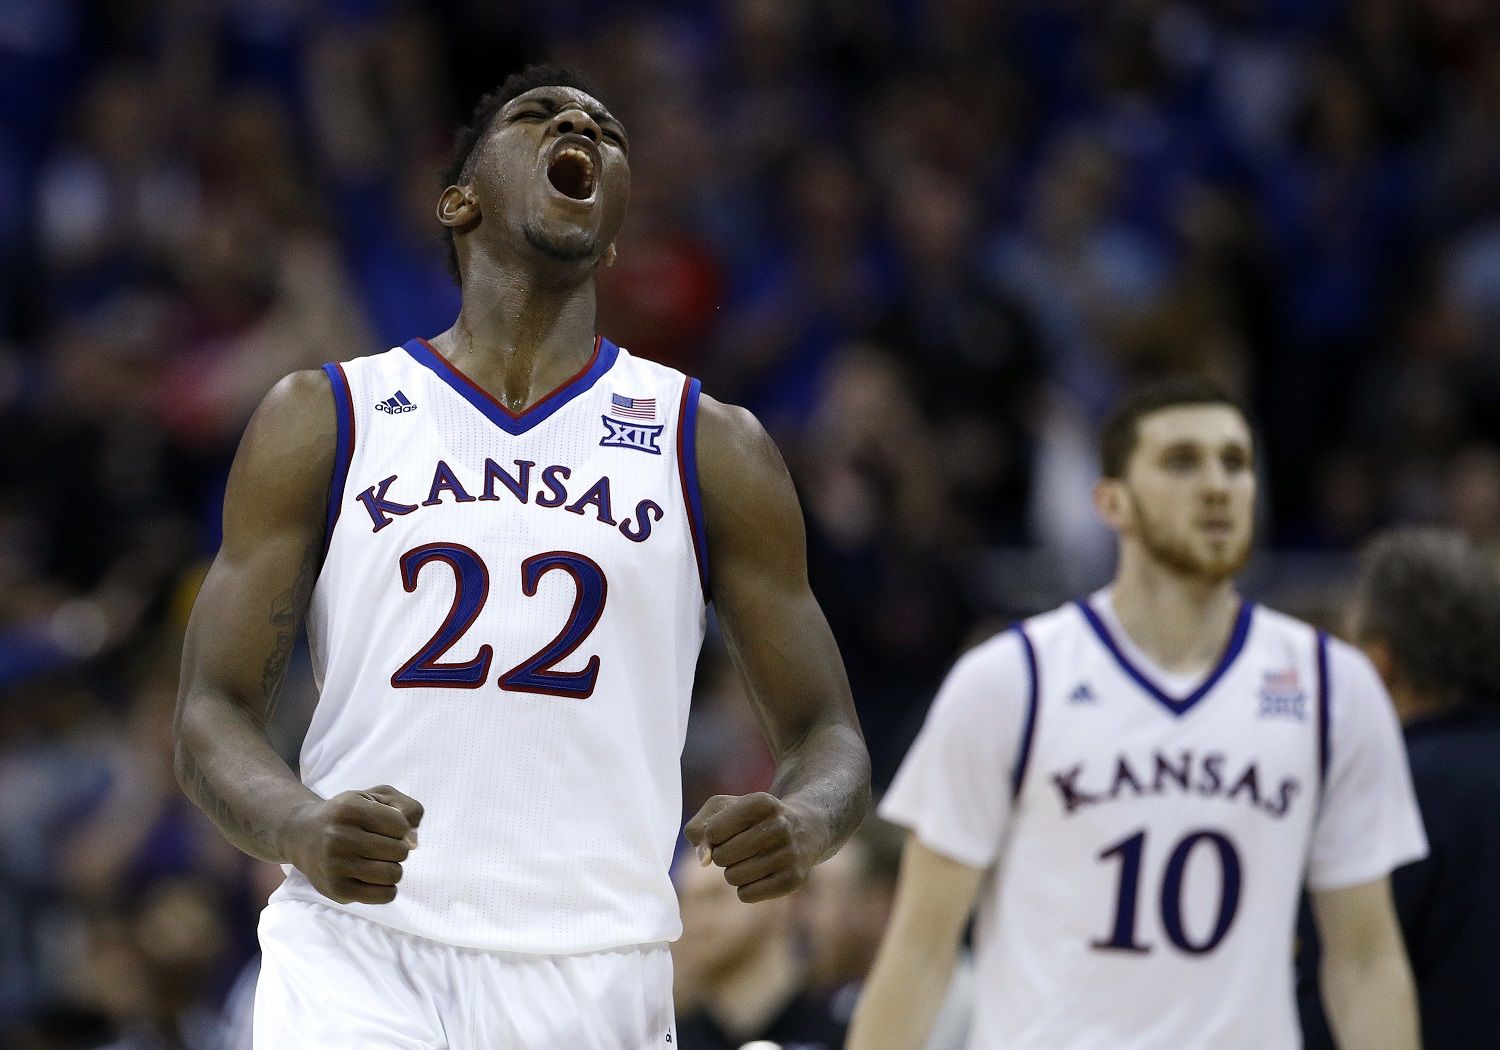 Kansas' Silvio De Sousa (22) celebrates during the second half of the NCAA college basketball championship game against West Virginia in the Big 12 men's tournament Saturday, March 10, 2018, in Kansas City, Mo. Kansas won 81-70. (AP Photo/Charlie Riedel)